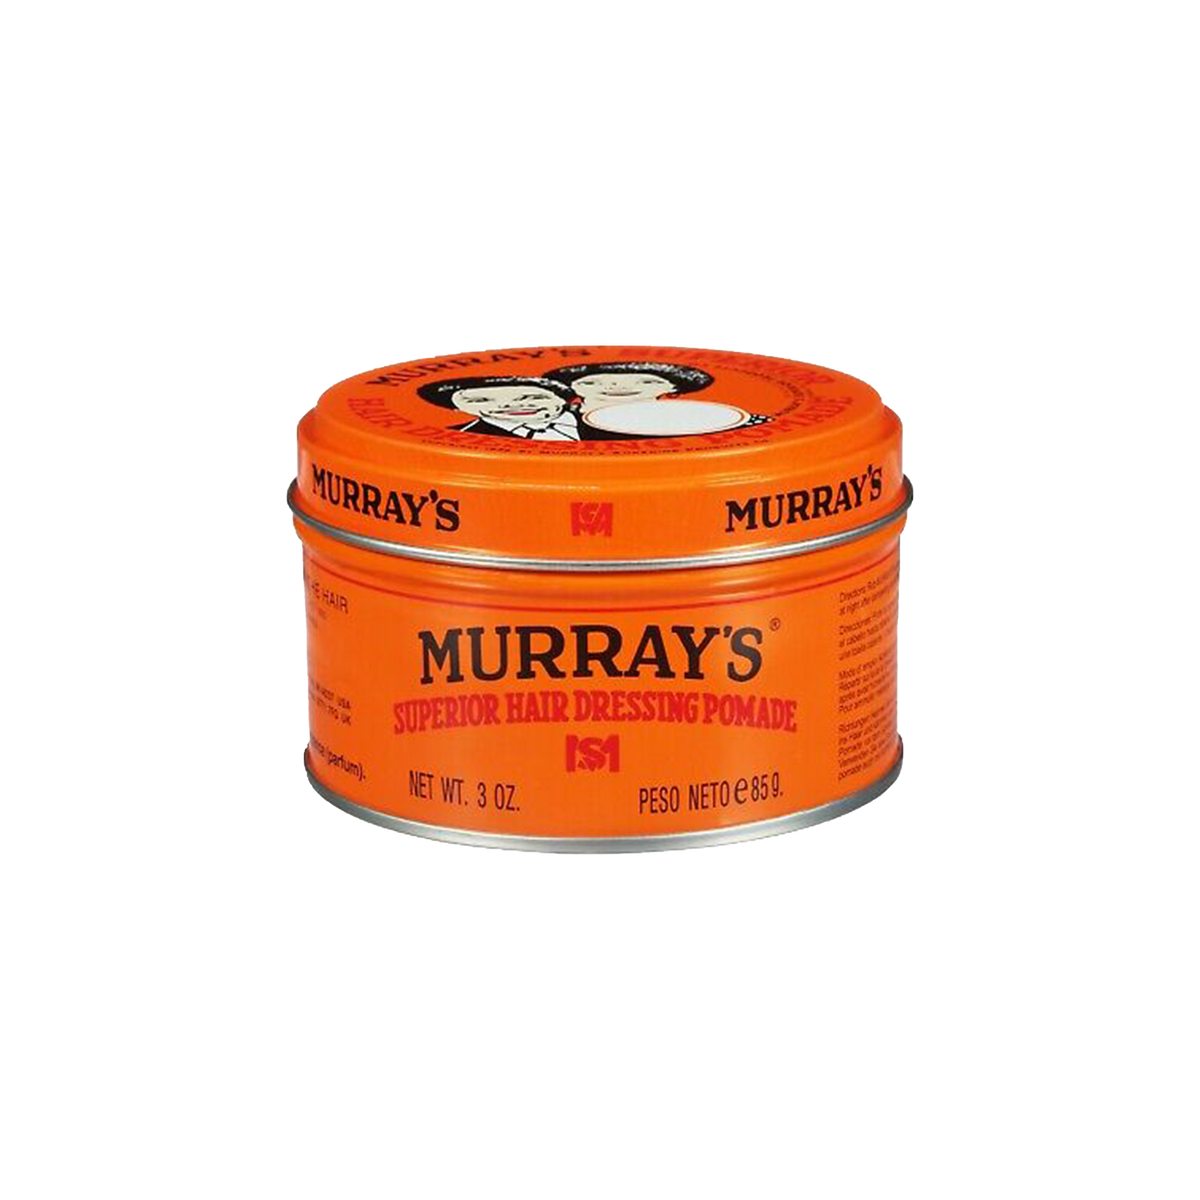 Murray's Superior Hair Dressing Pomade, Styling Products, Beauty & Health